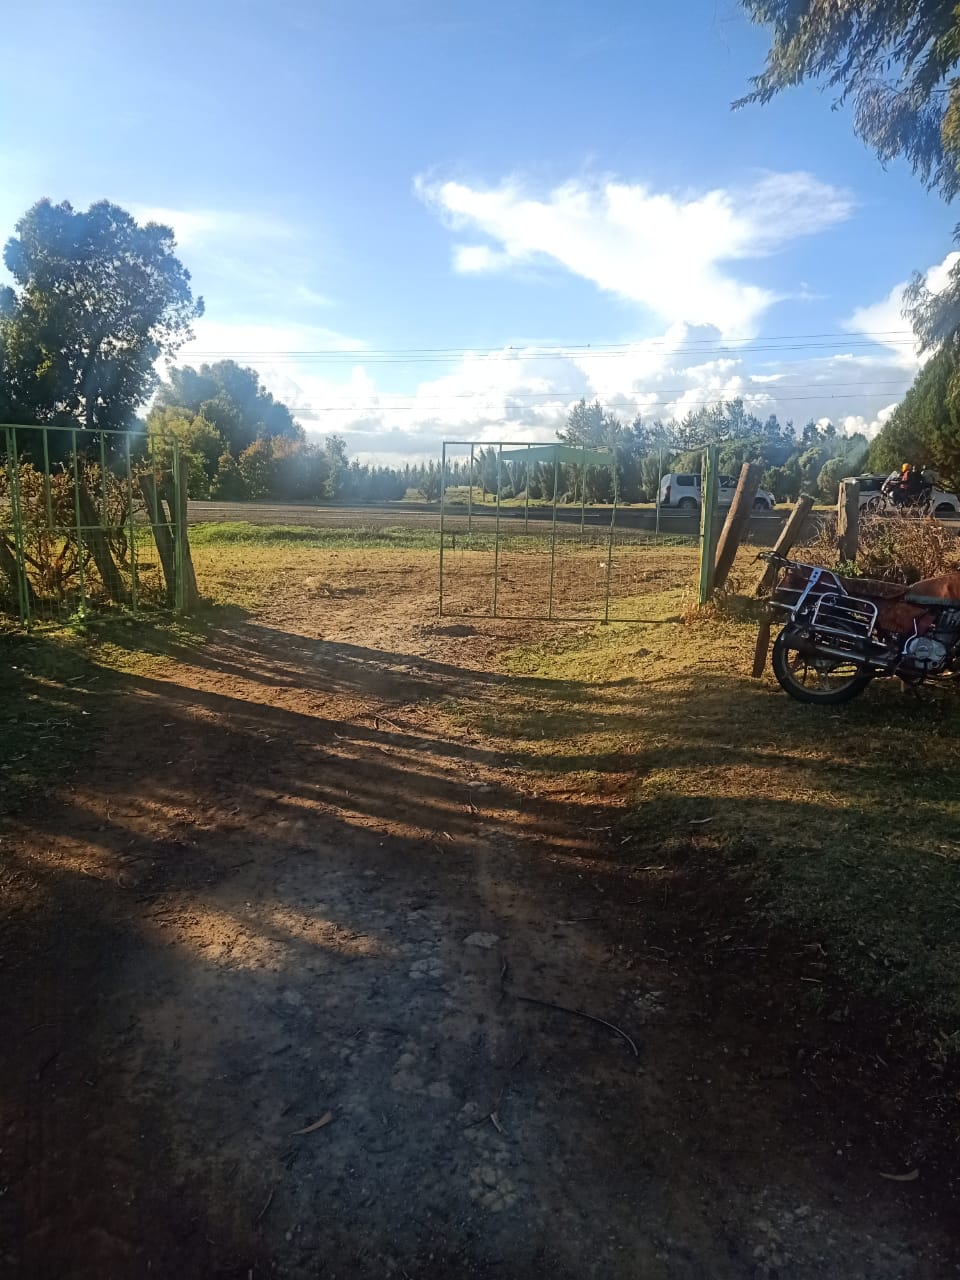 14.5 Acres agricultural land for sale in Timau Kisima Touching tarmac